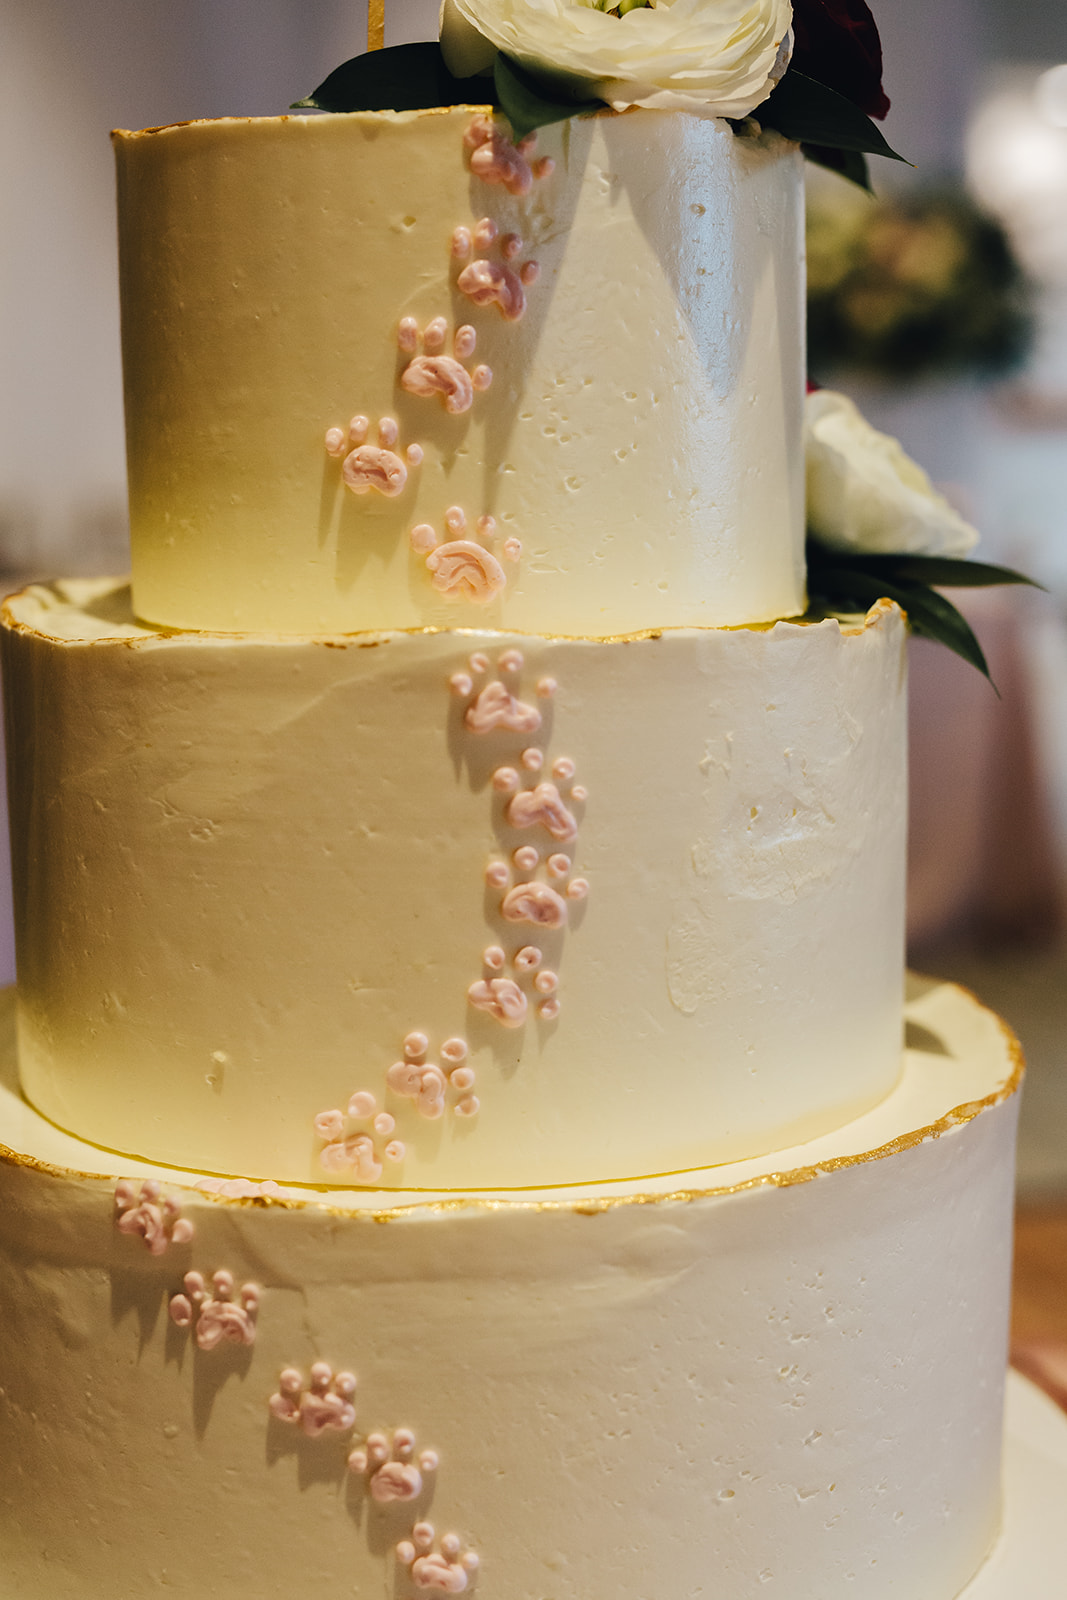 West Bay Beach wedding cake with paw prints on the side